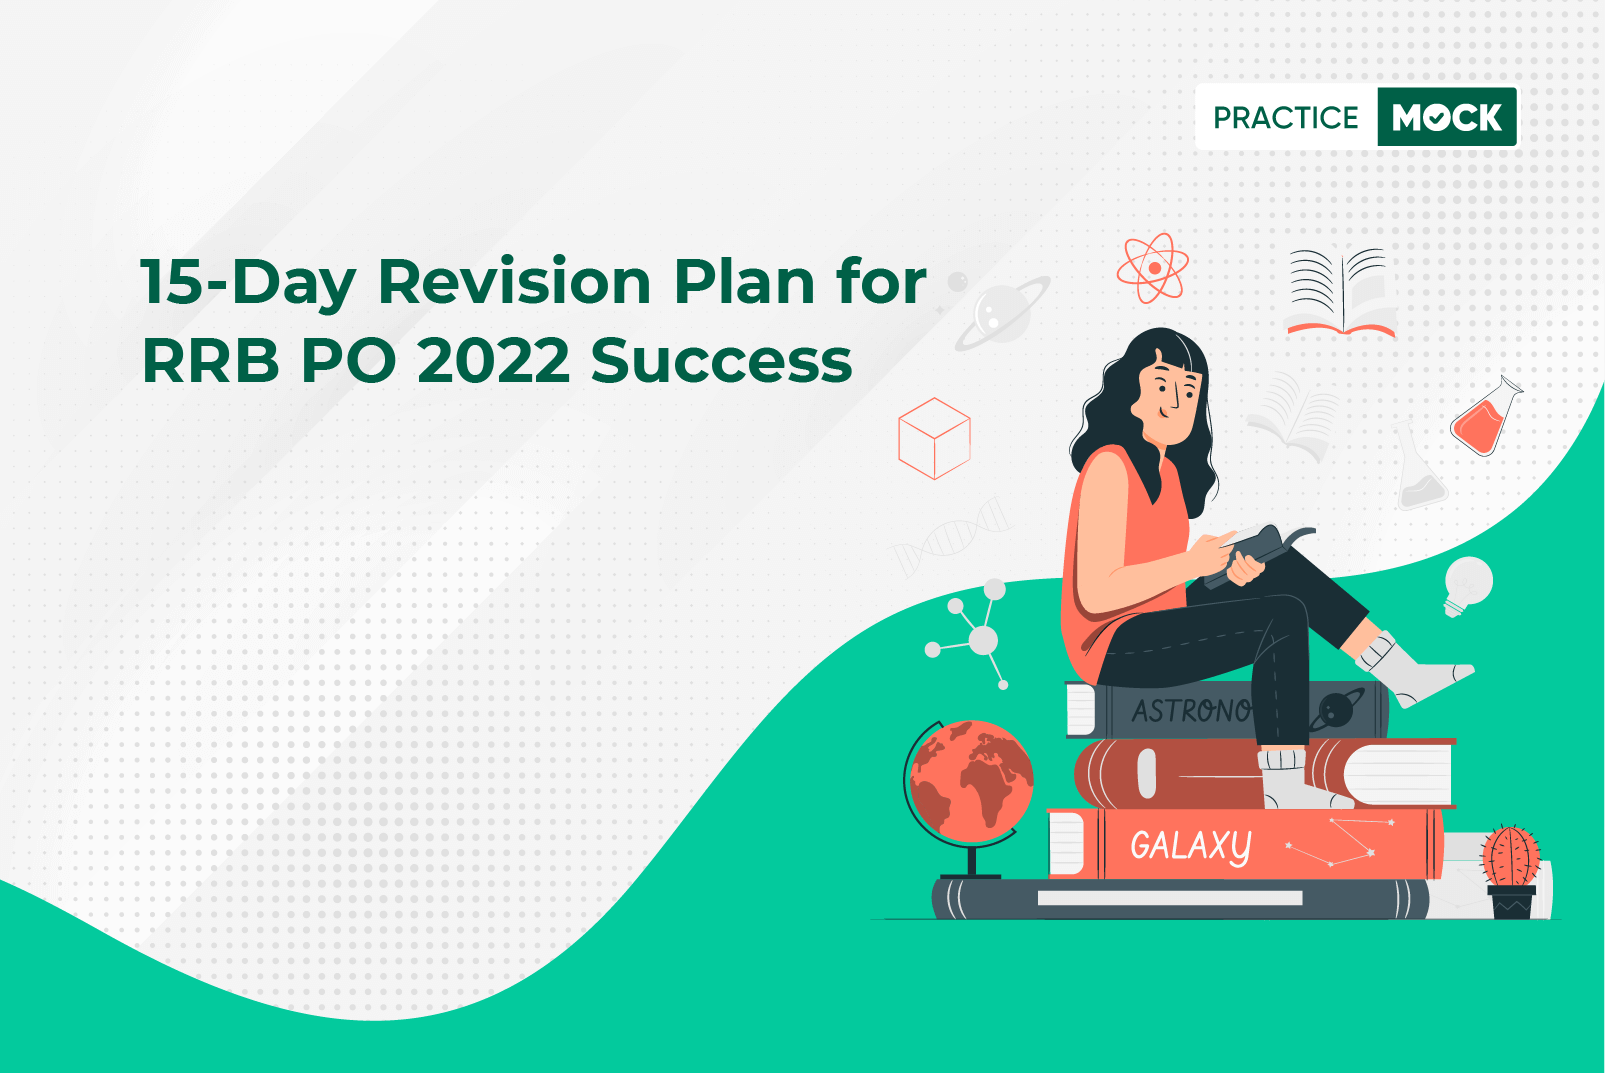 15-Day Revision Plan for RRB PO 2022 Success